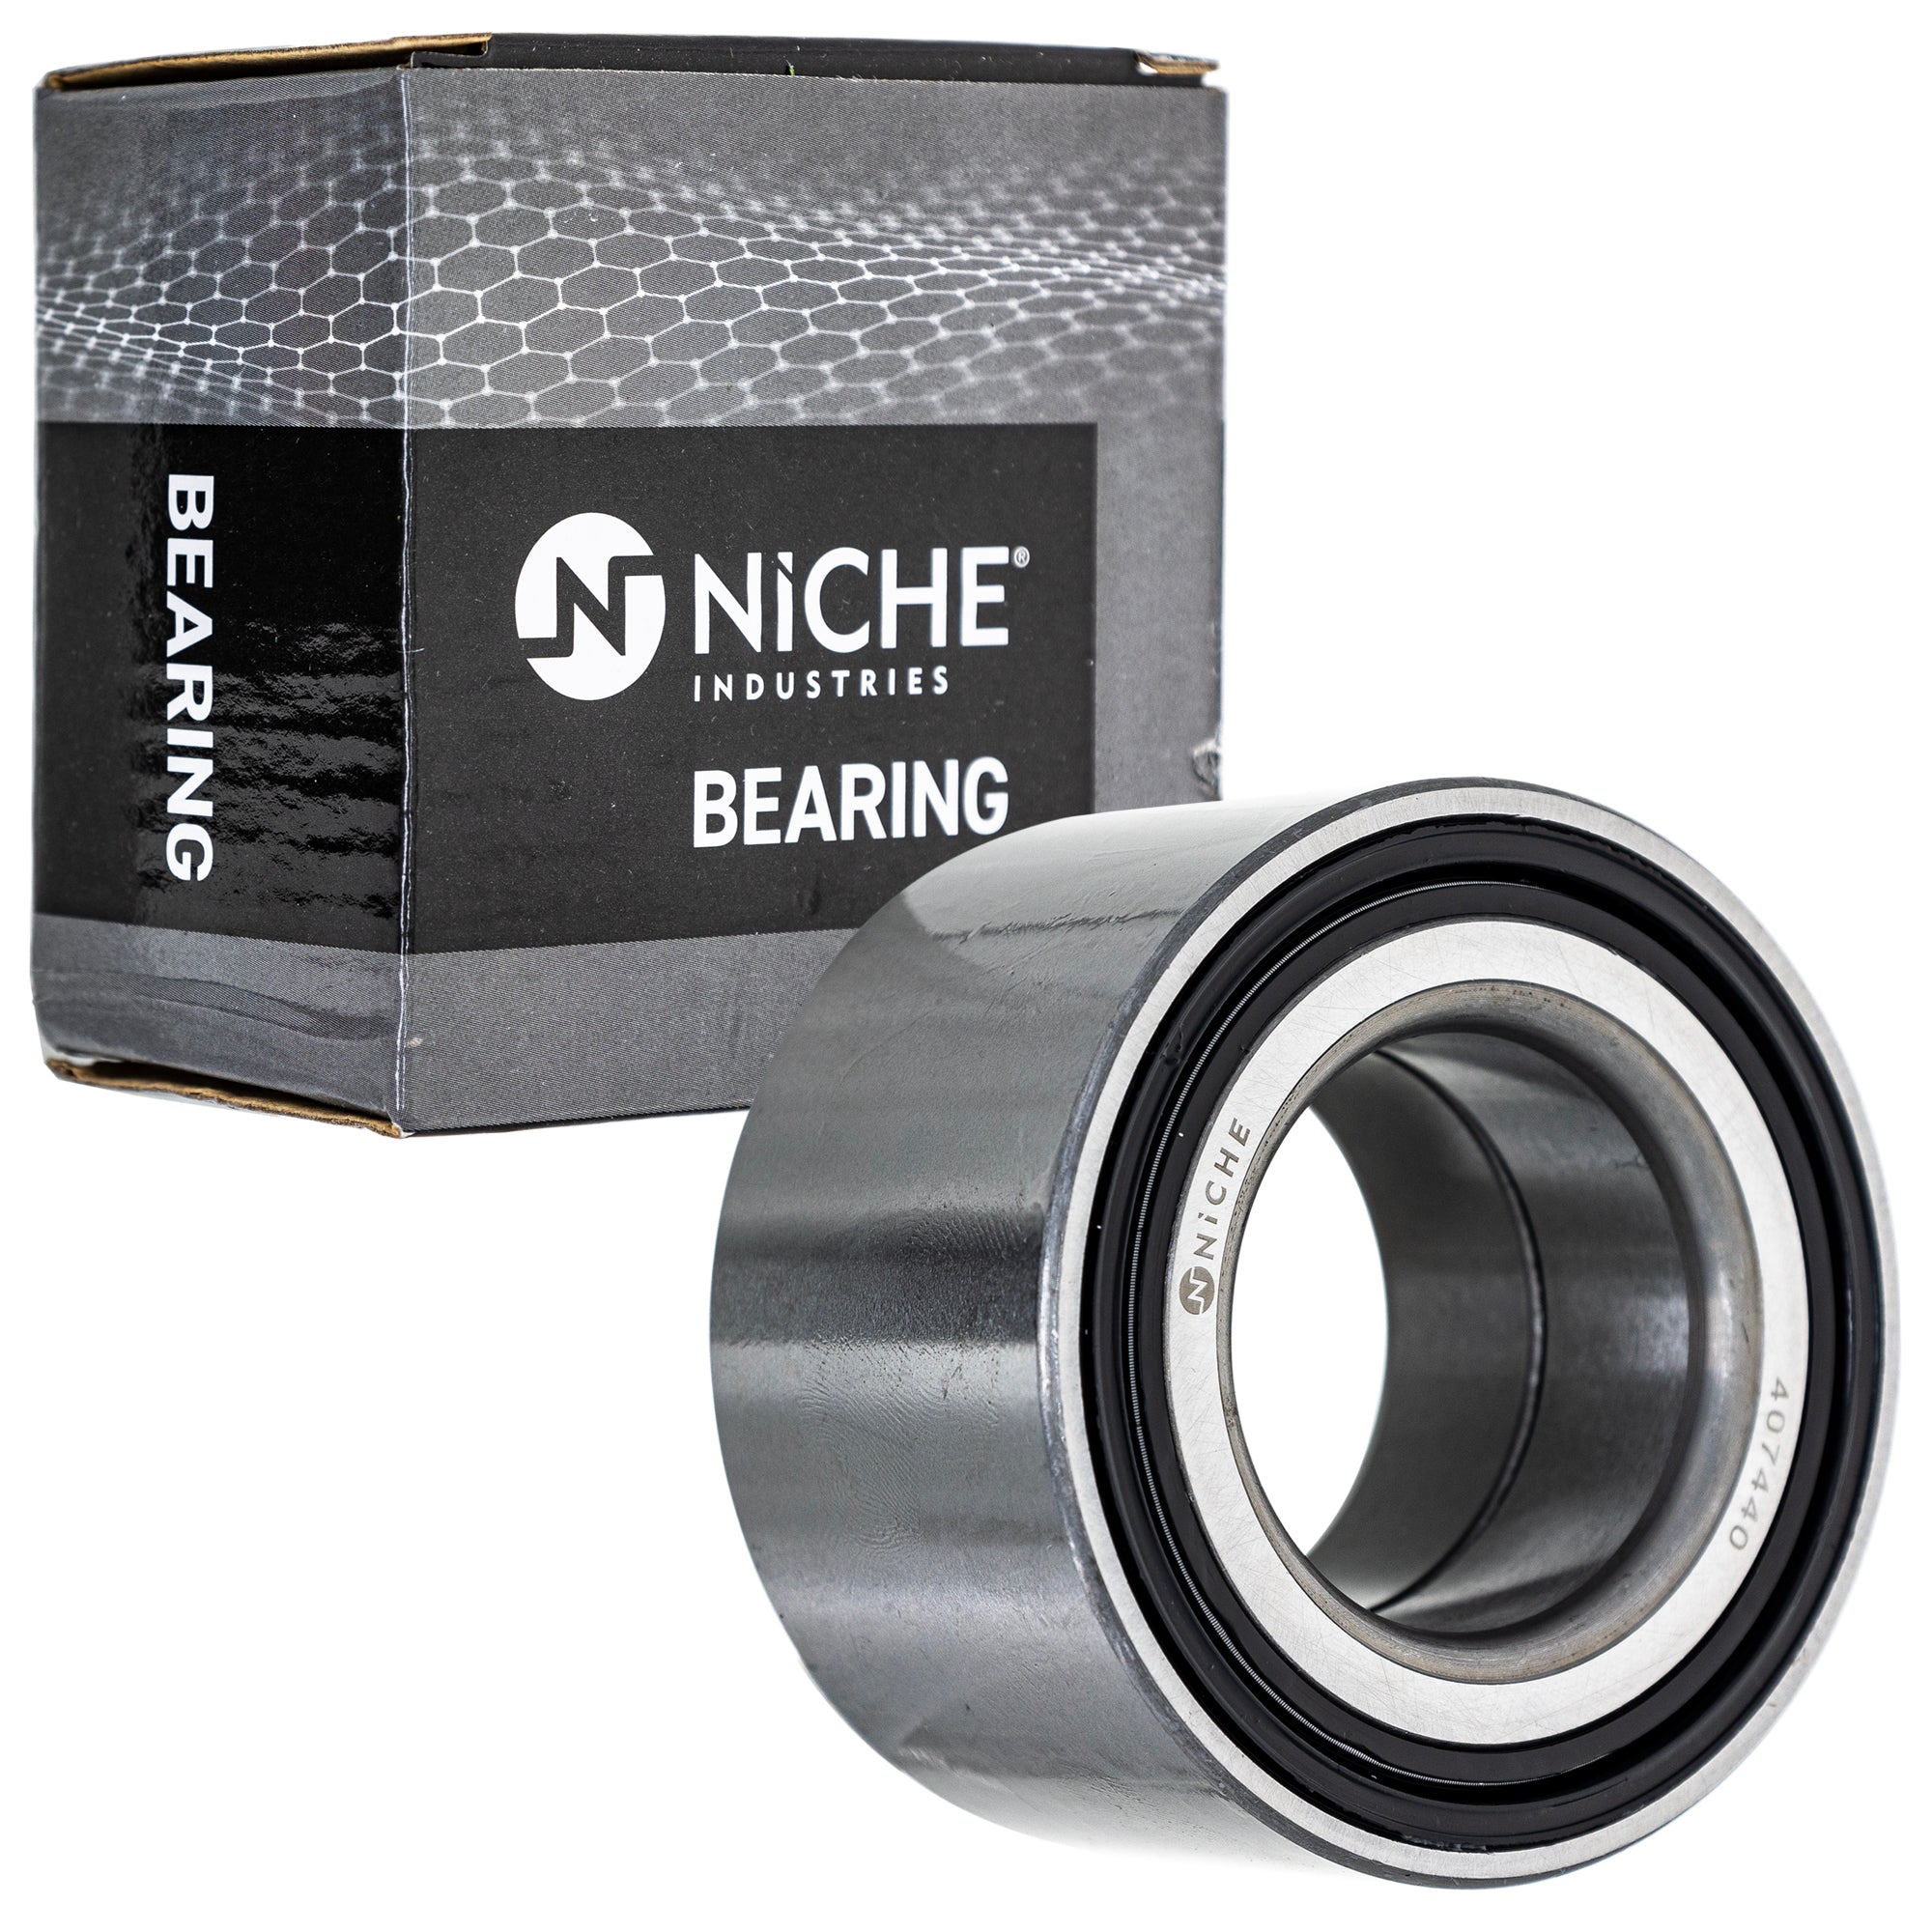 NICHE 519-CBB2259R Bearing 10-Pack for zOTHER GEM Stateline ST1300